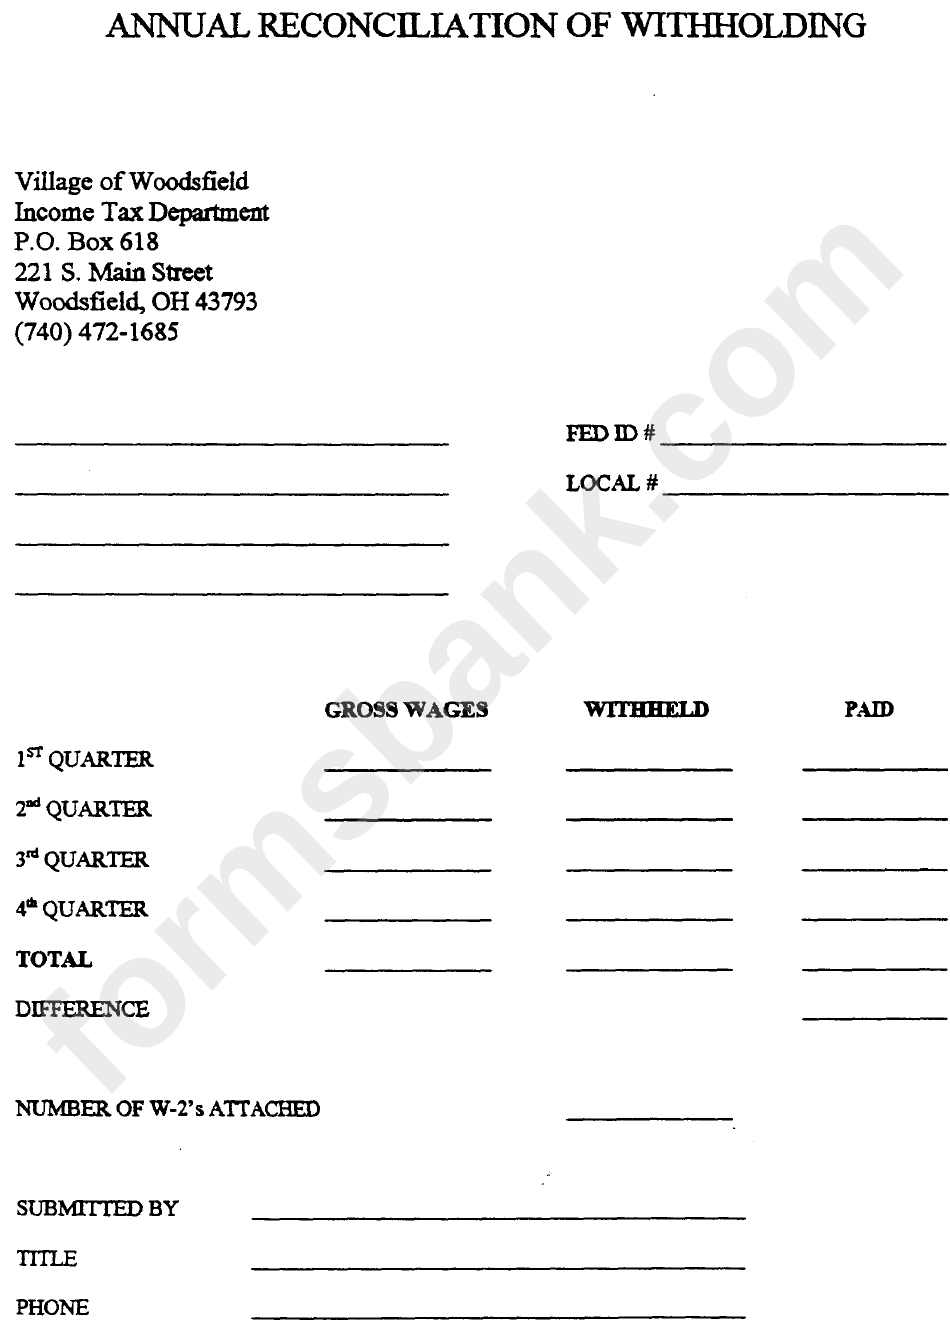 Annual Reconciliation Form Of Withholding - State Of Ohio